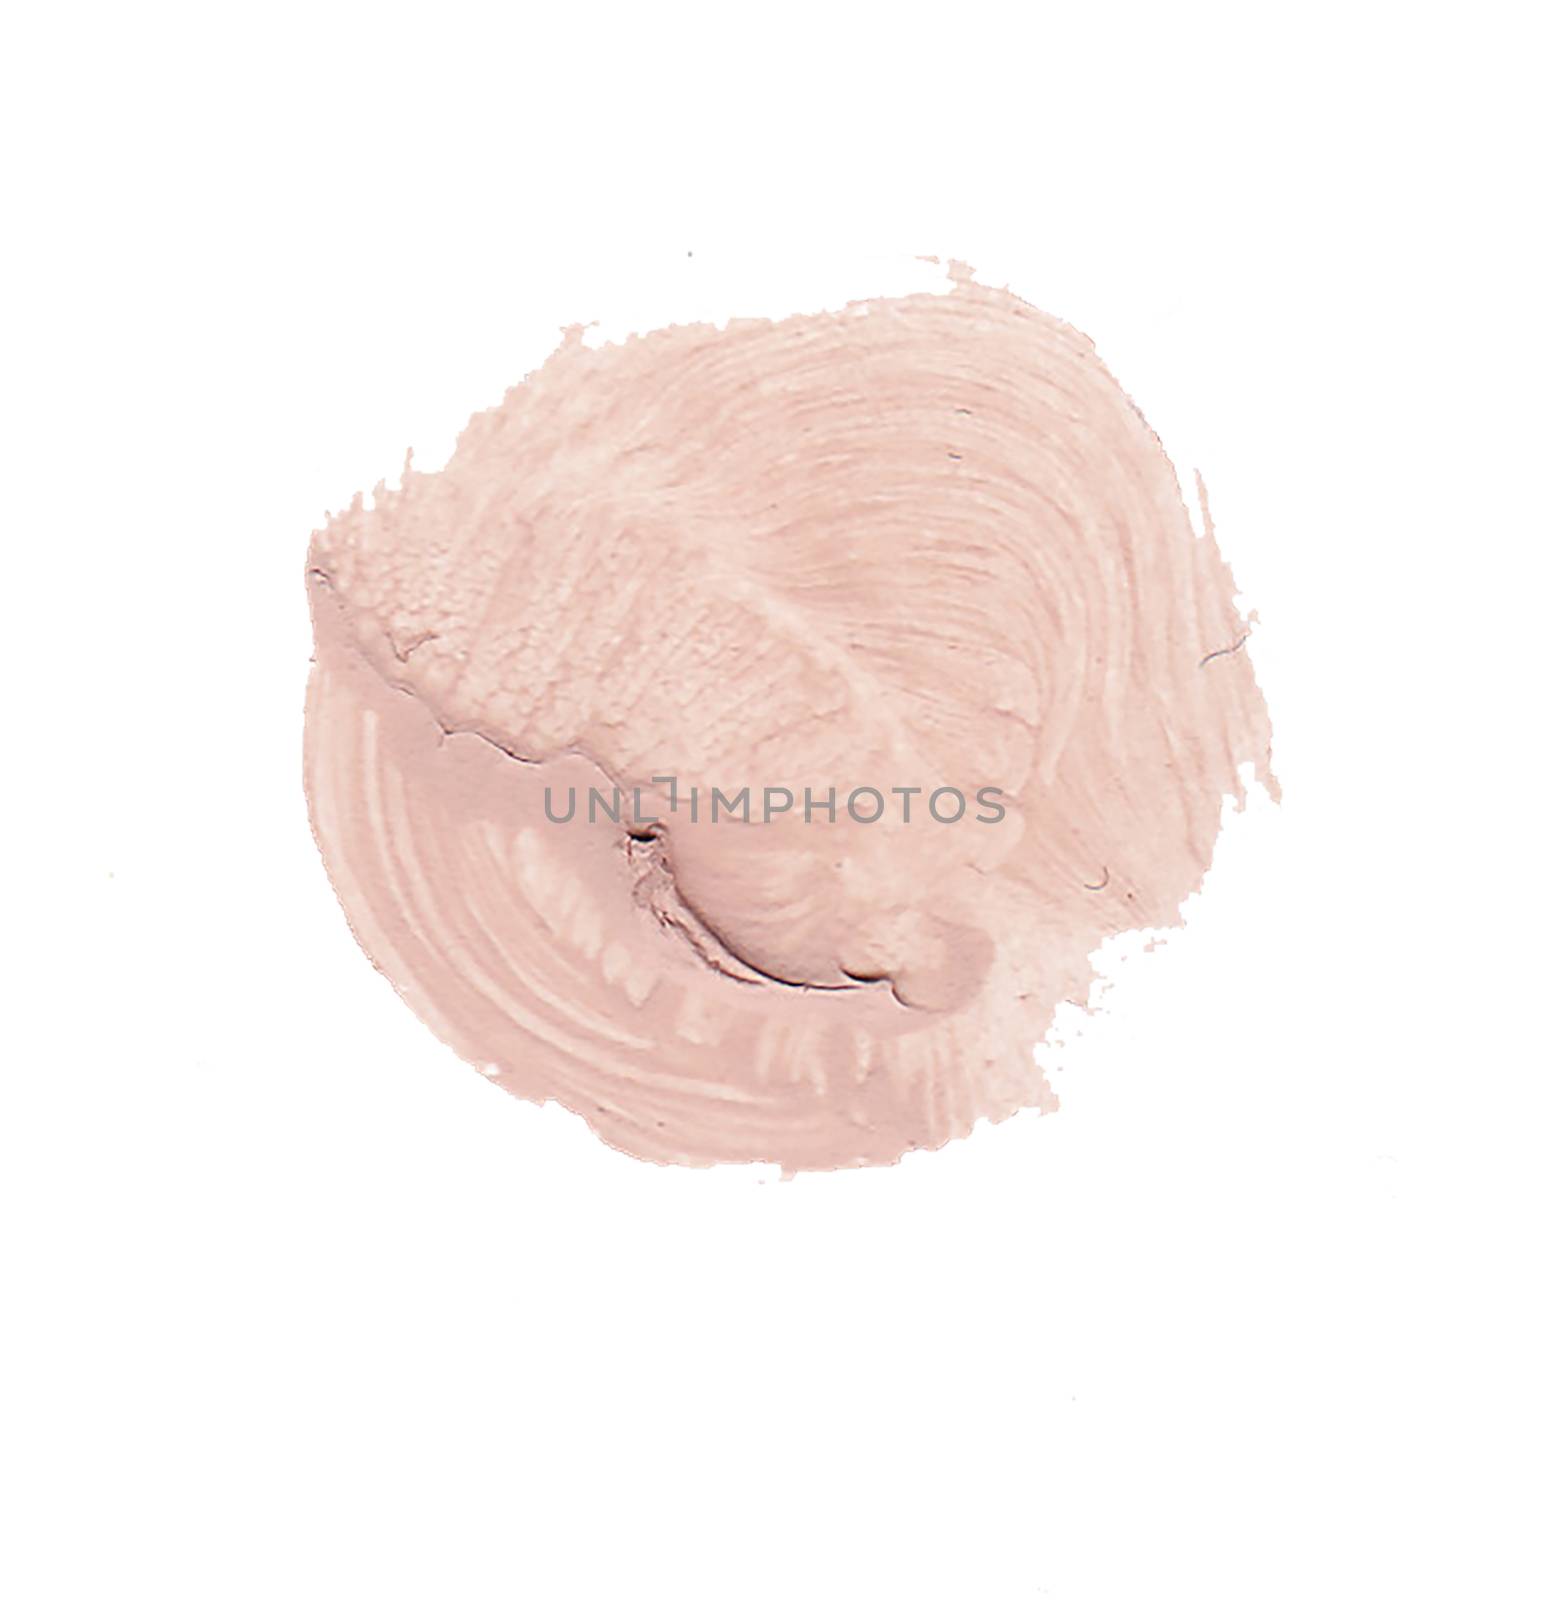 Foundation smudge in round shape isolated on white background. Creamy texture makeup smudge illustration, brush stroke. For card, banner, poster design.